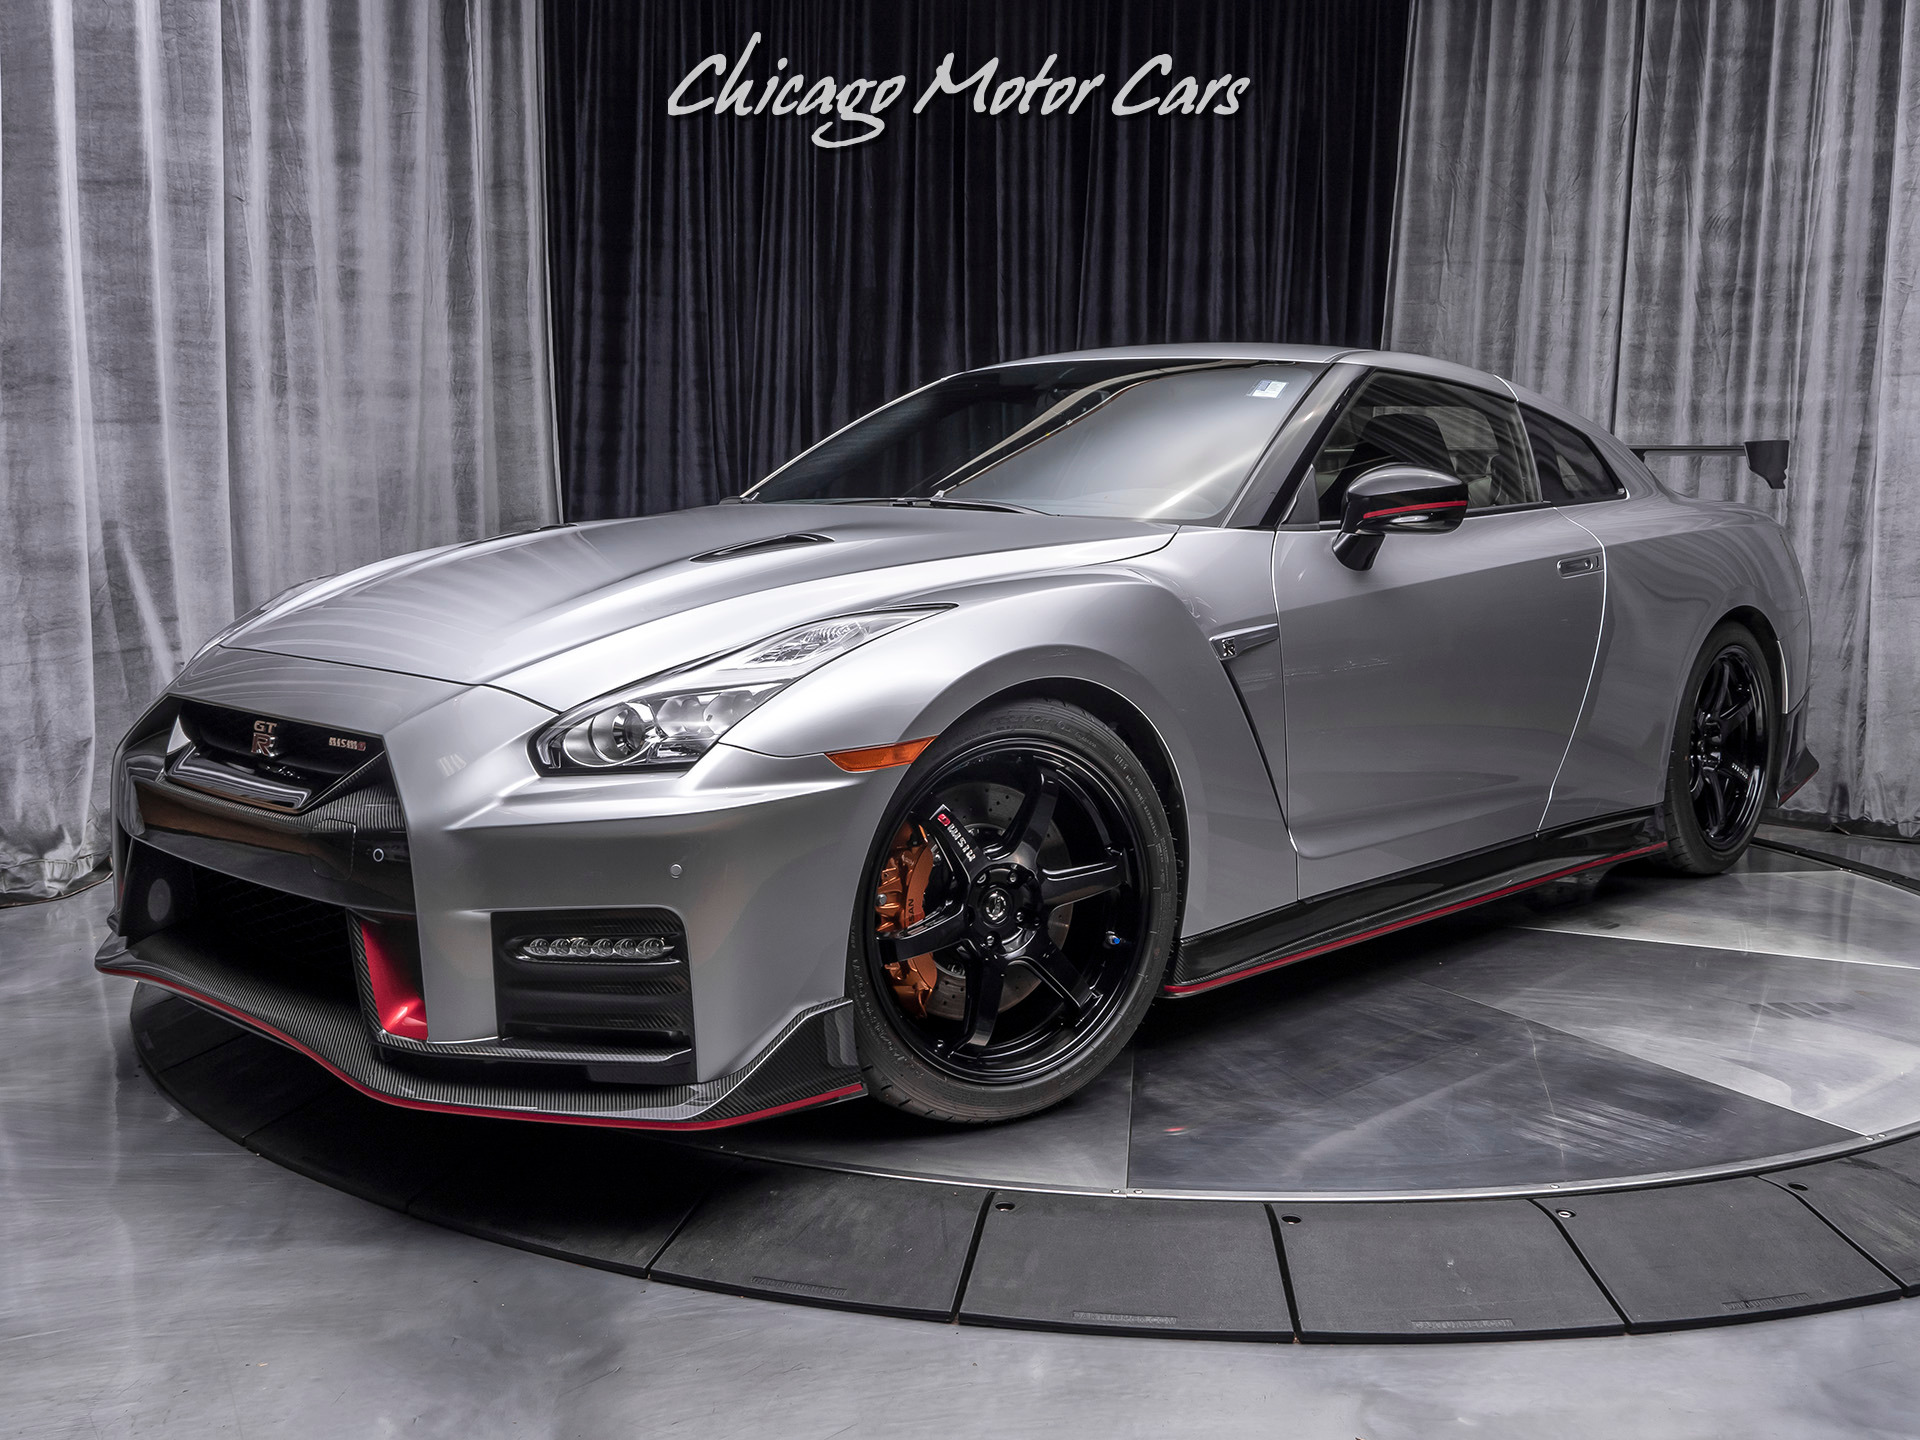 Used 2018 Nissan GTR NISMO Coupe SUPER RARE EXAMPLE! For